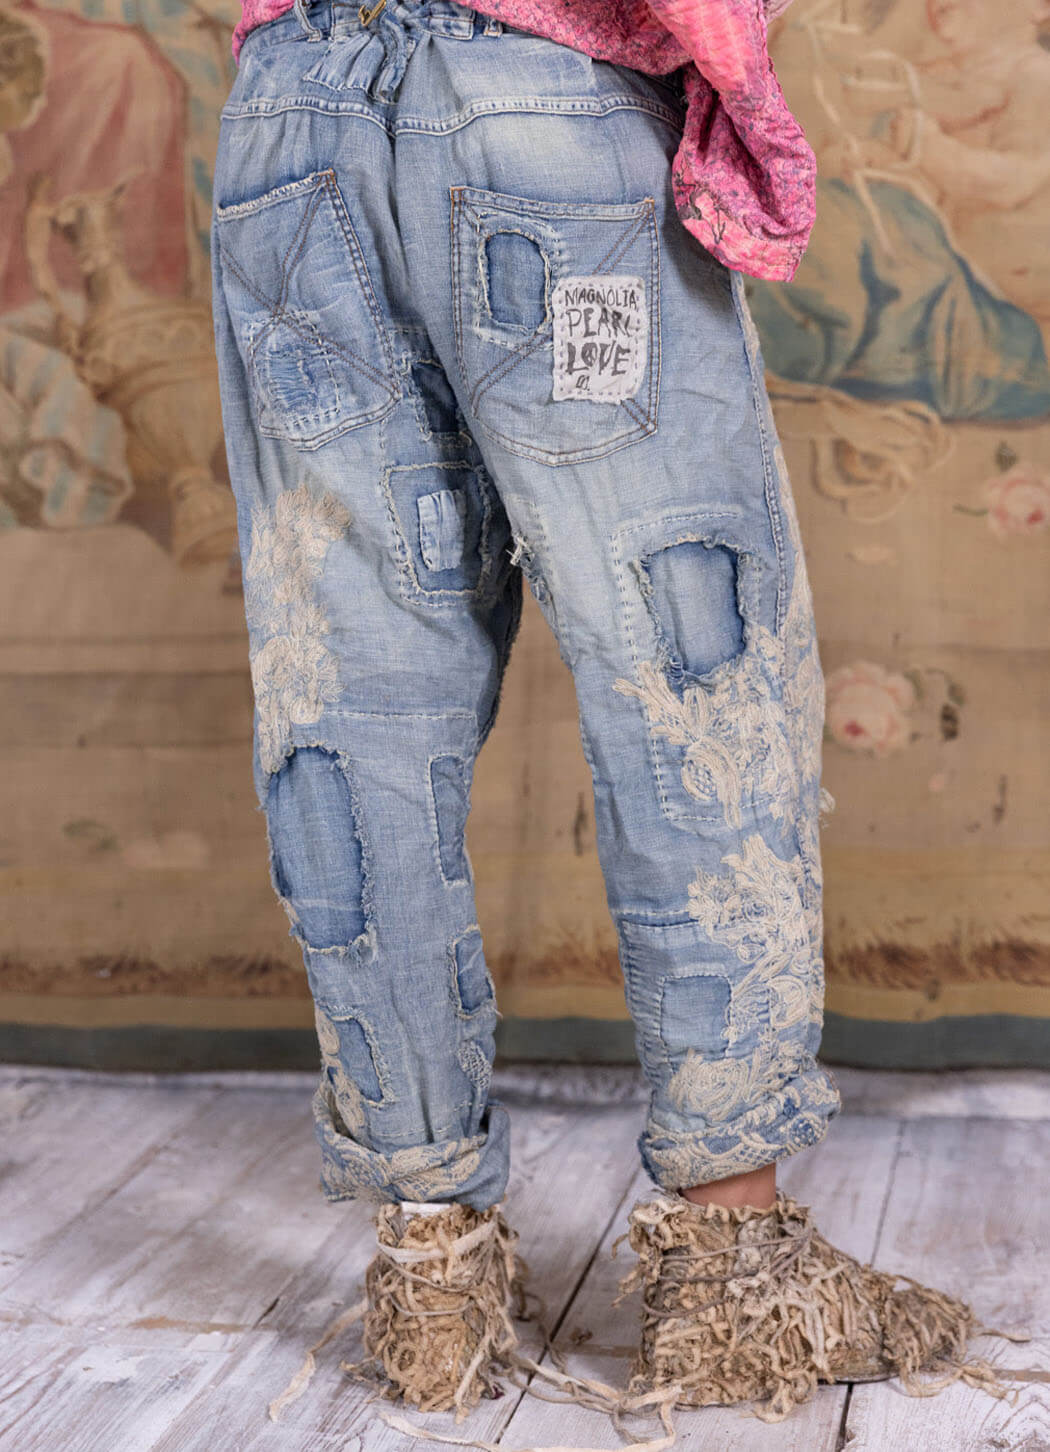 Magnolia Pearl Lace Embroidered Miner Denims